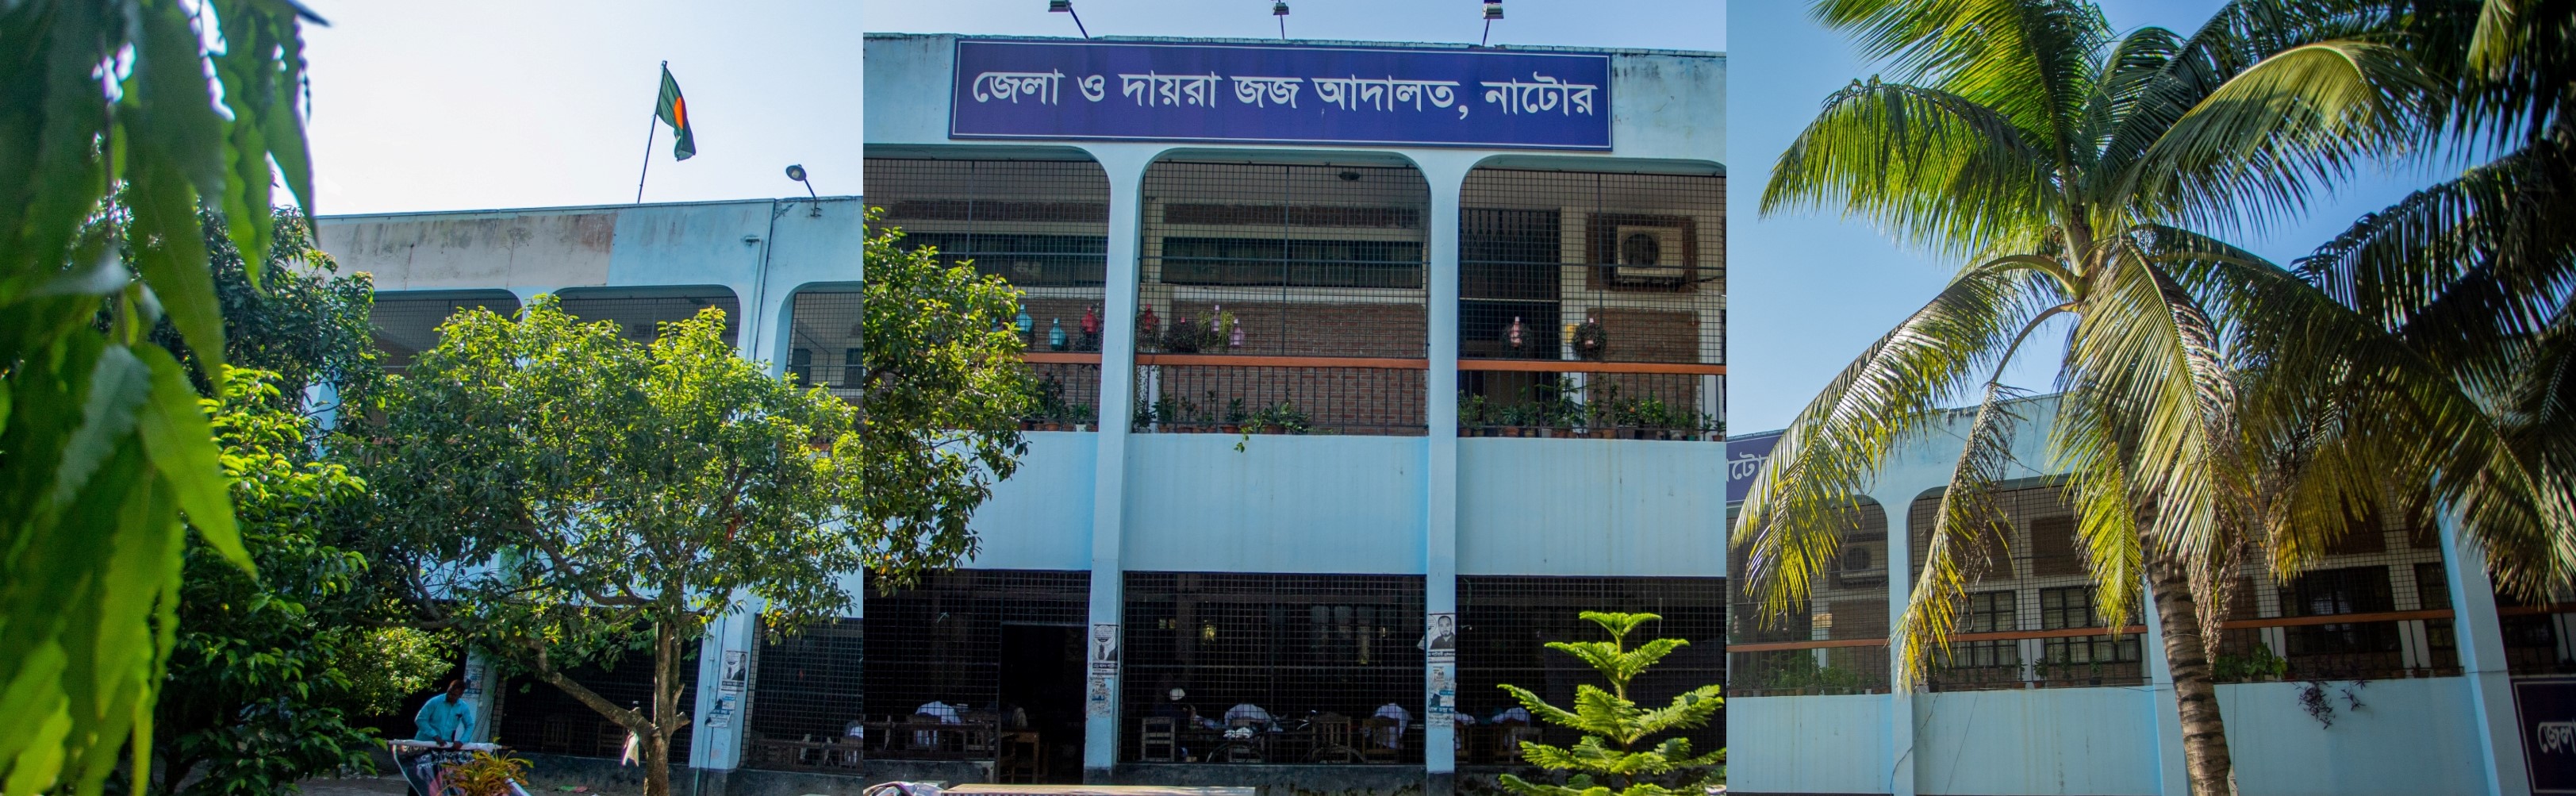 District Court and Sessions Judge, Natore